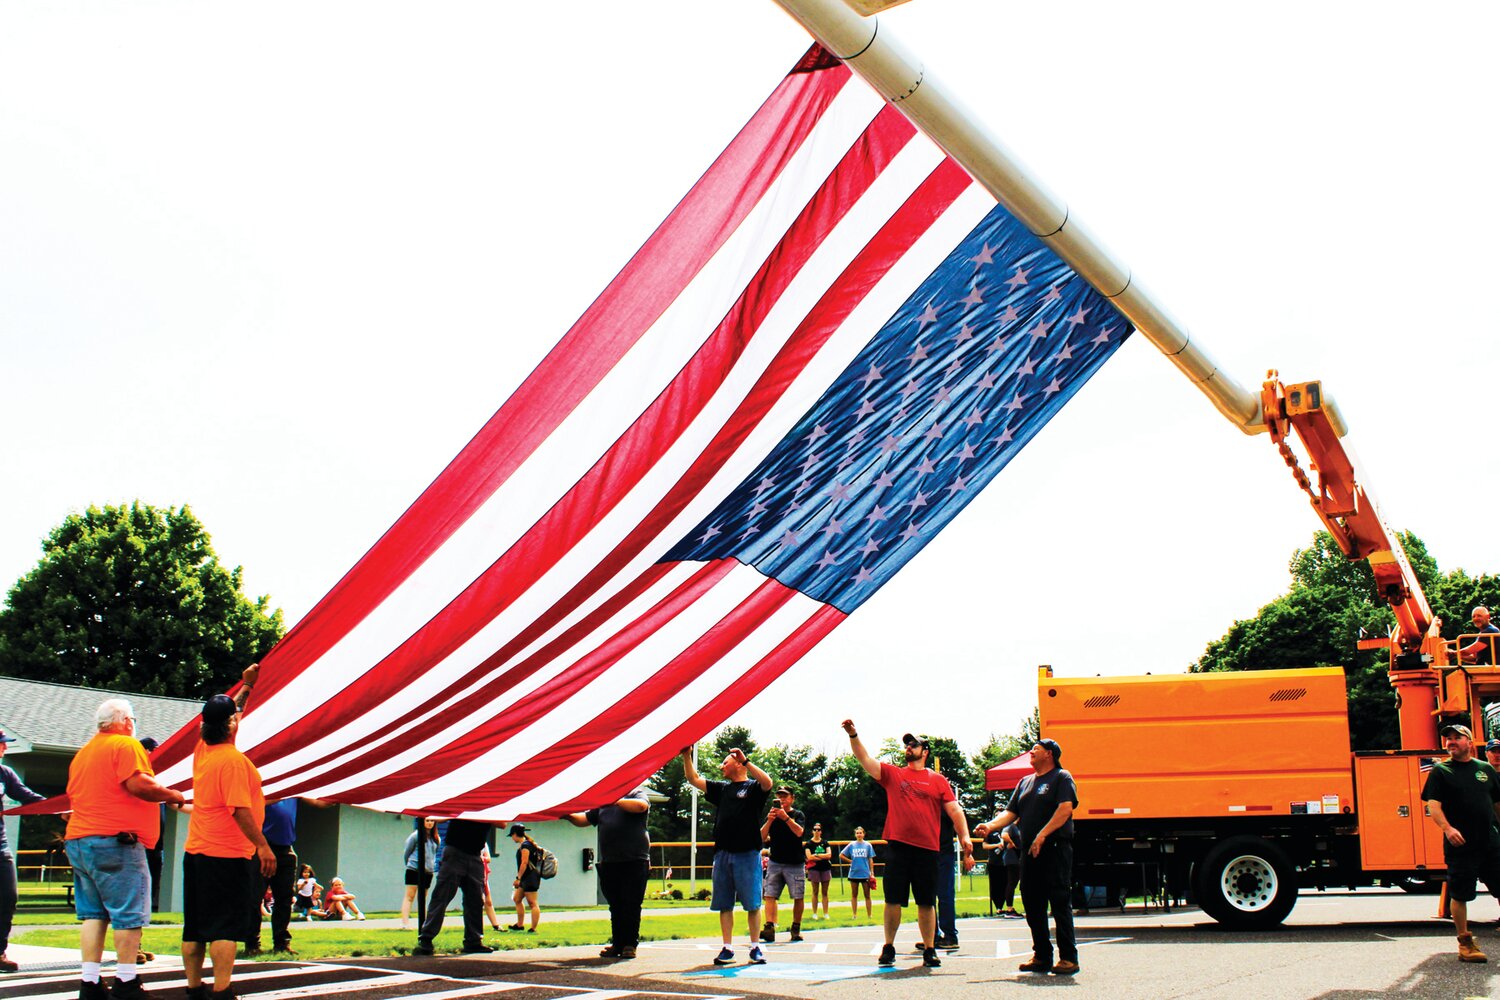 An American flag, provided by ATS Tree Services, that hung during a tree planting event at Hilltown Civic Park is lowered in preparation for a formal flag folding ceremony.